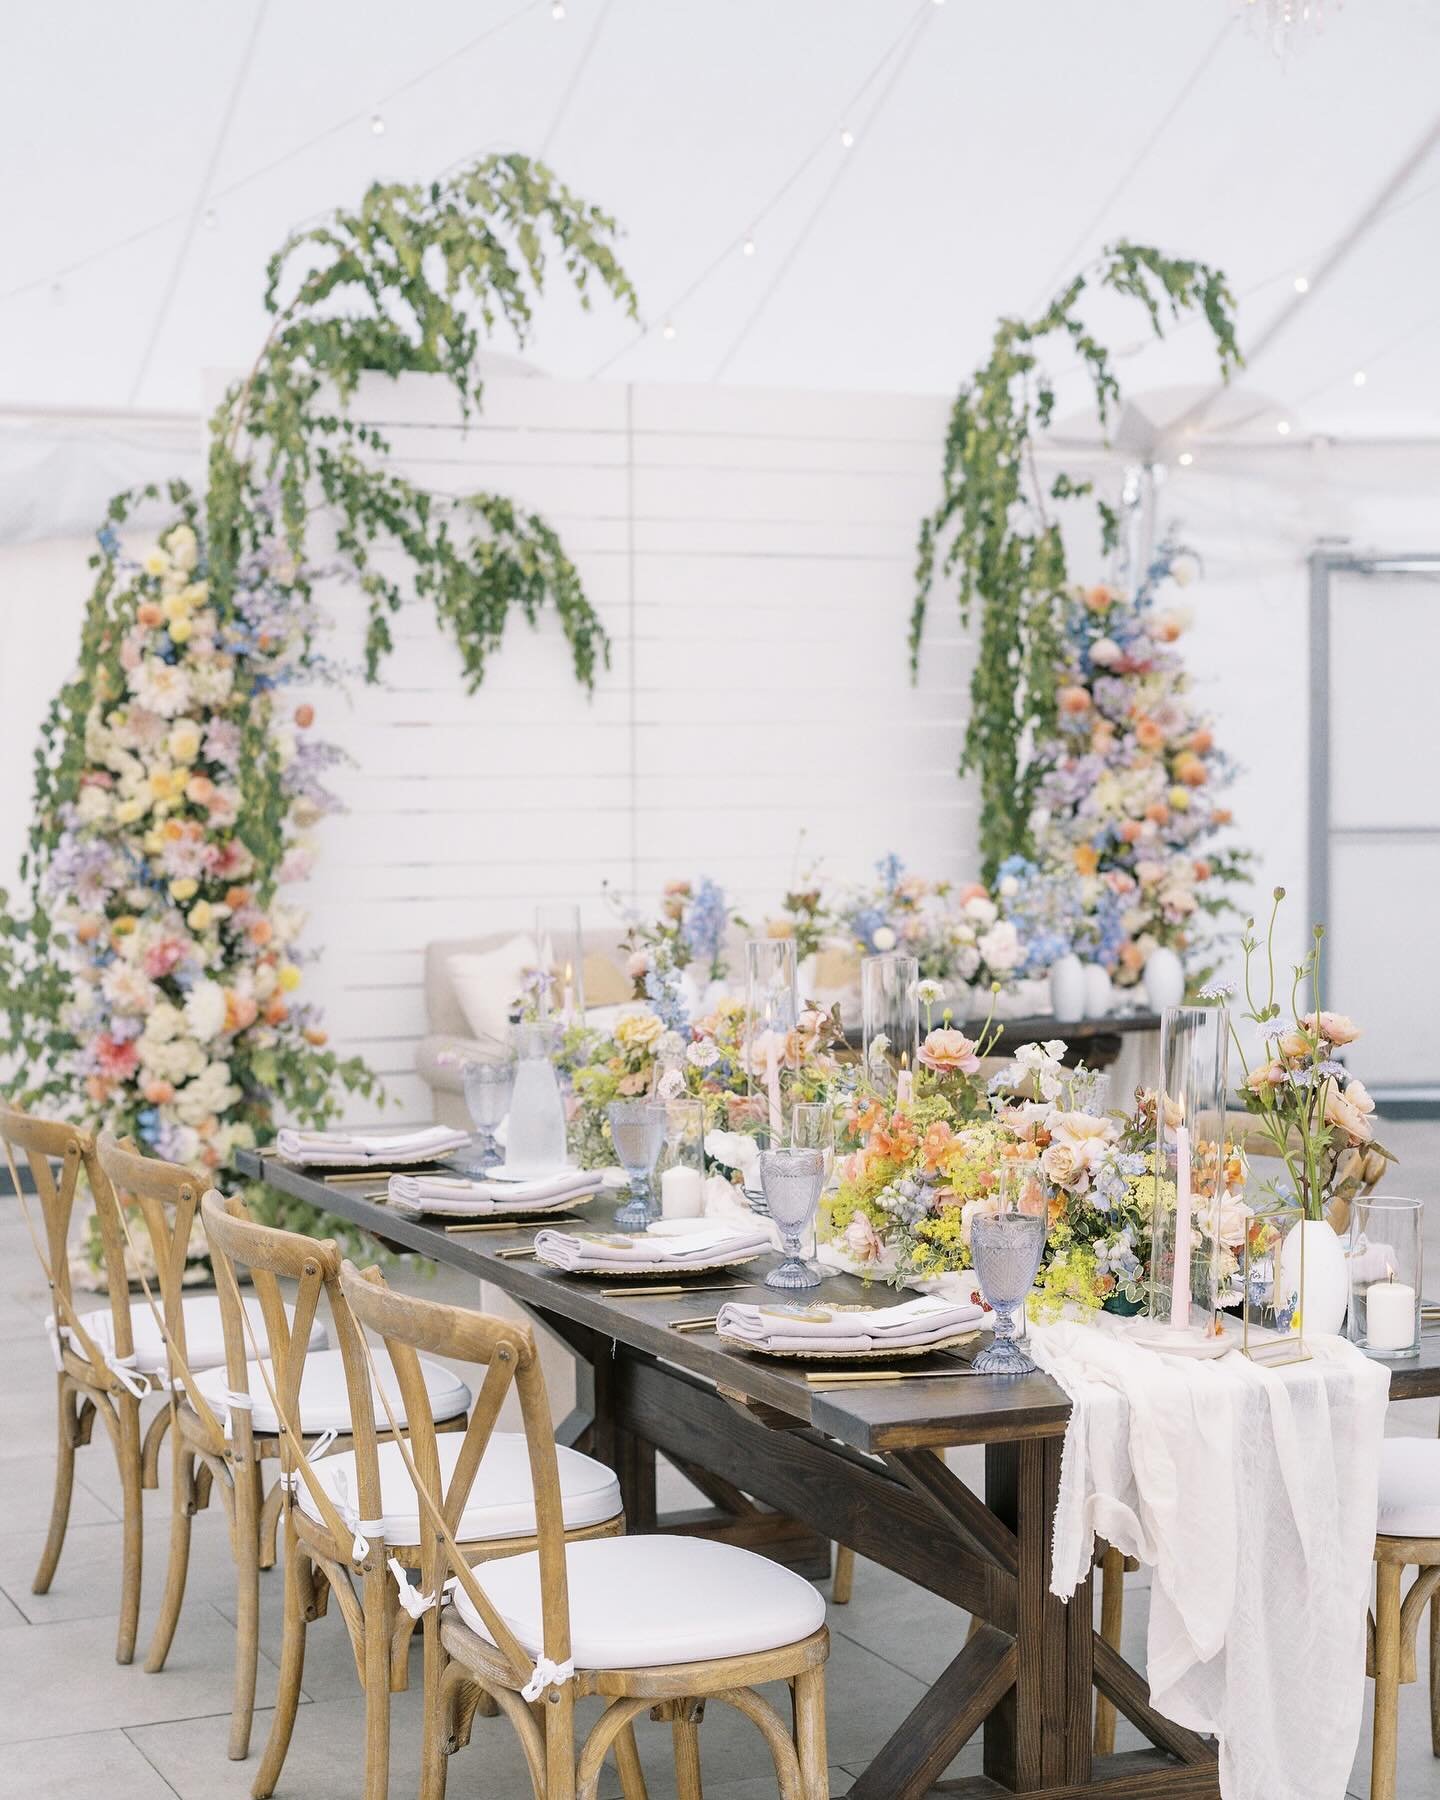 ✨From every angle this Sweetheart Table was a stunner!✨
.
We are big fans of a sweetheart table for many reasons  especially this one that was the focal point and statement piece of the reception. 
.
The day is all about celebrating both of you and Y